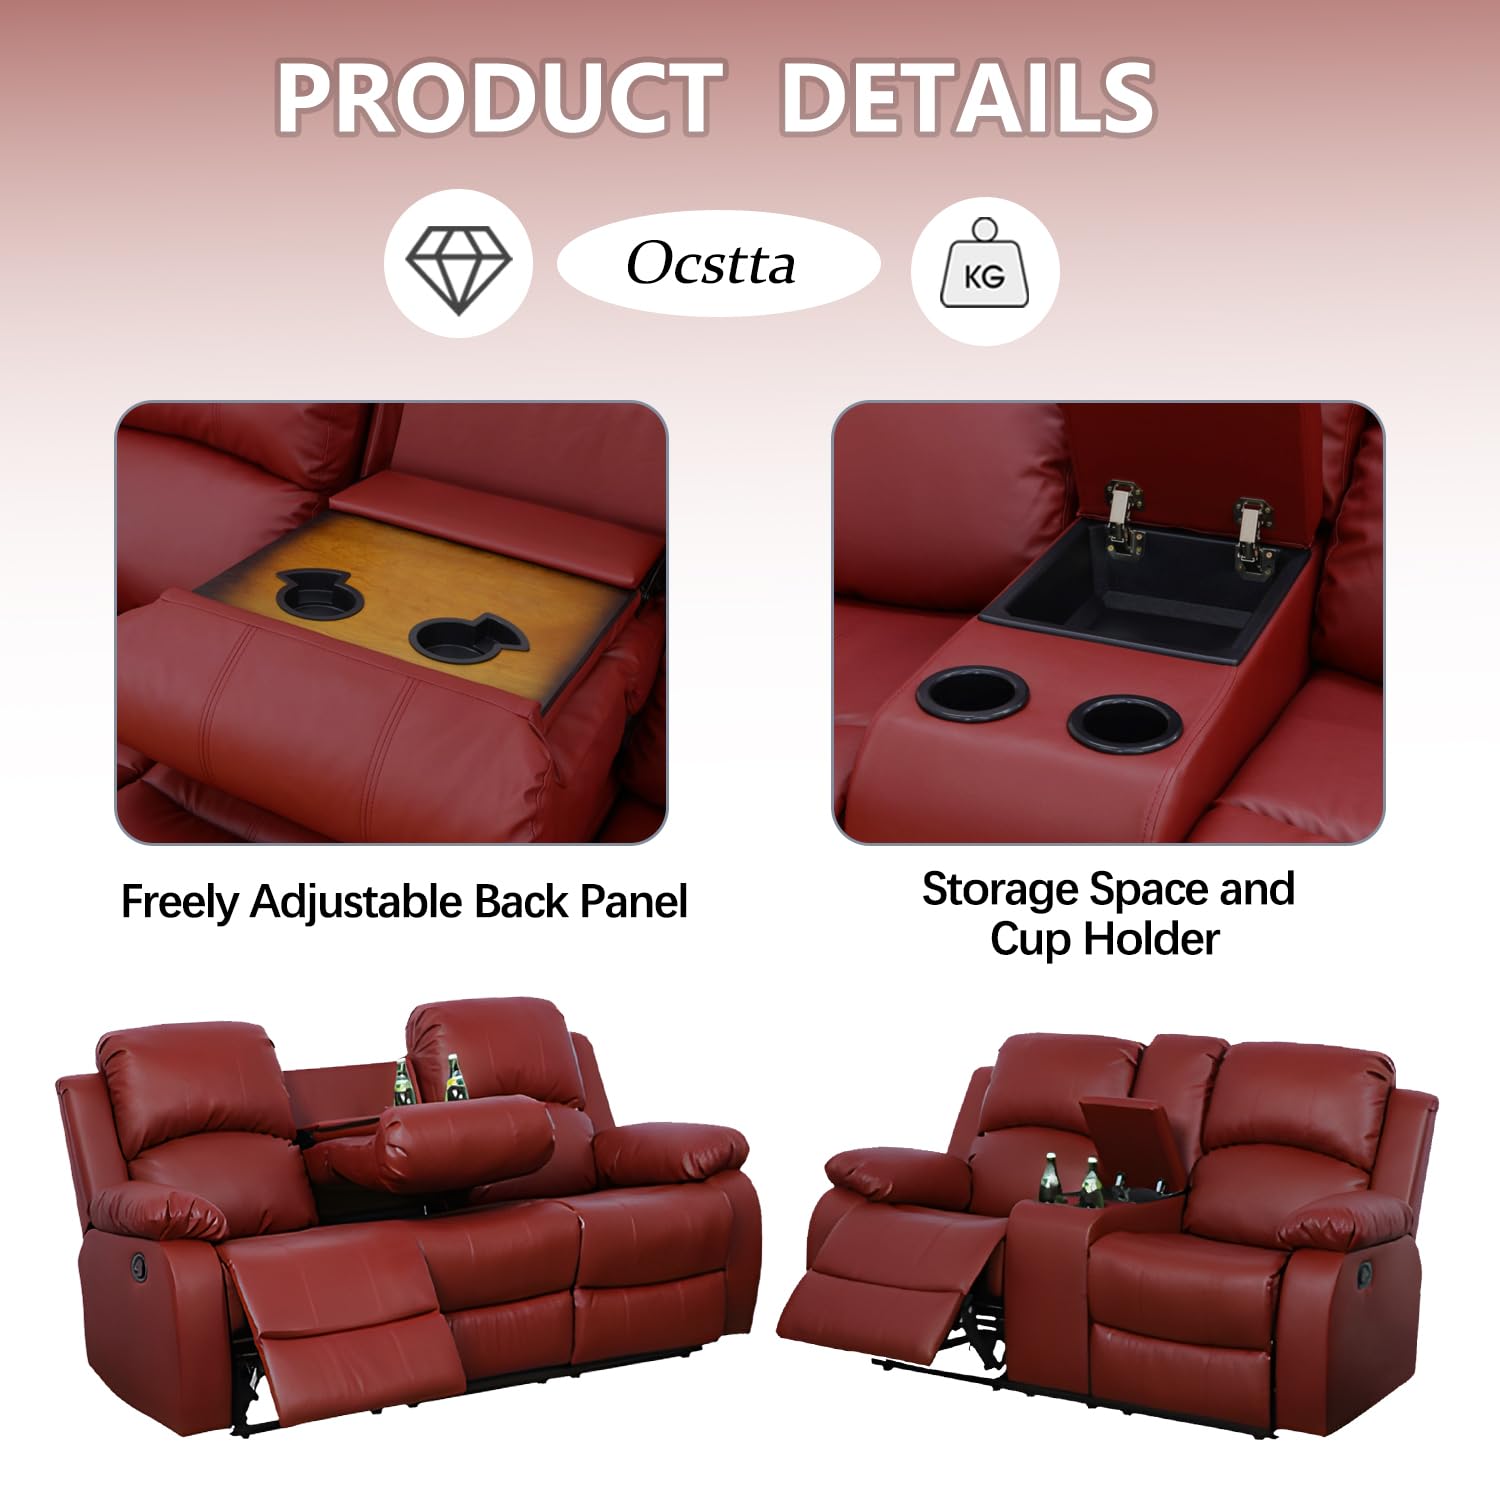 Ocstta Manual Leather Recliner Sofa Set for Living Room Furniture Set,Leather Recliner Couch Set for Home/Office,Leather Reclining Sofa Set for 3-Pieces(Sofa+Loveseat+Chair) Red